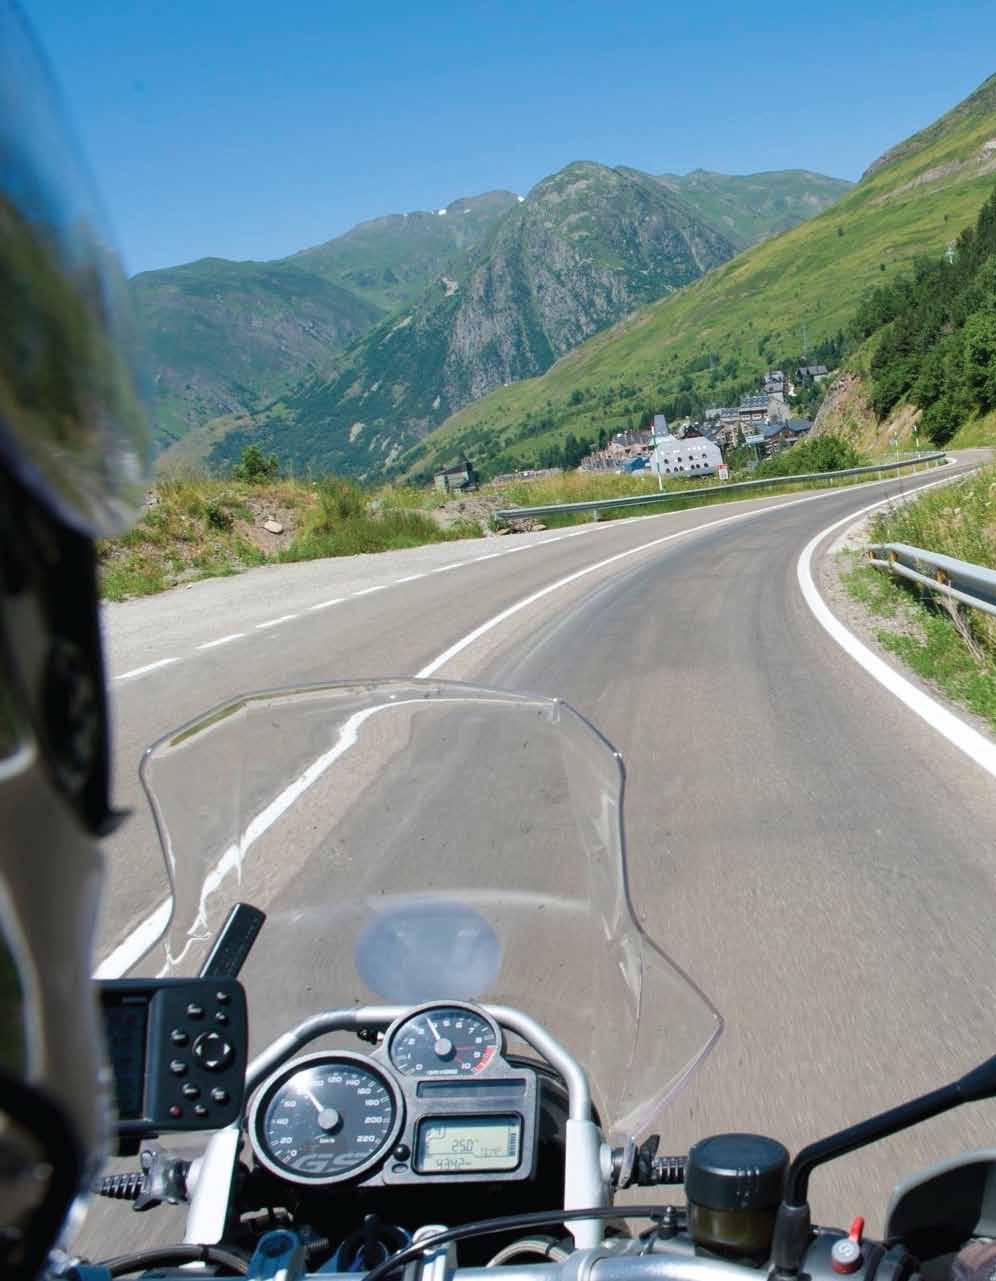 Tour Leaders The single most important factor for a superior and memorable motorcycling adventure is the caliber of the tour leaders.